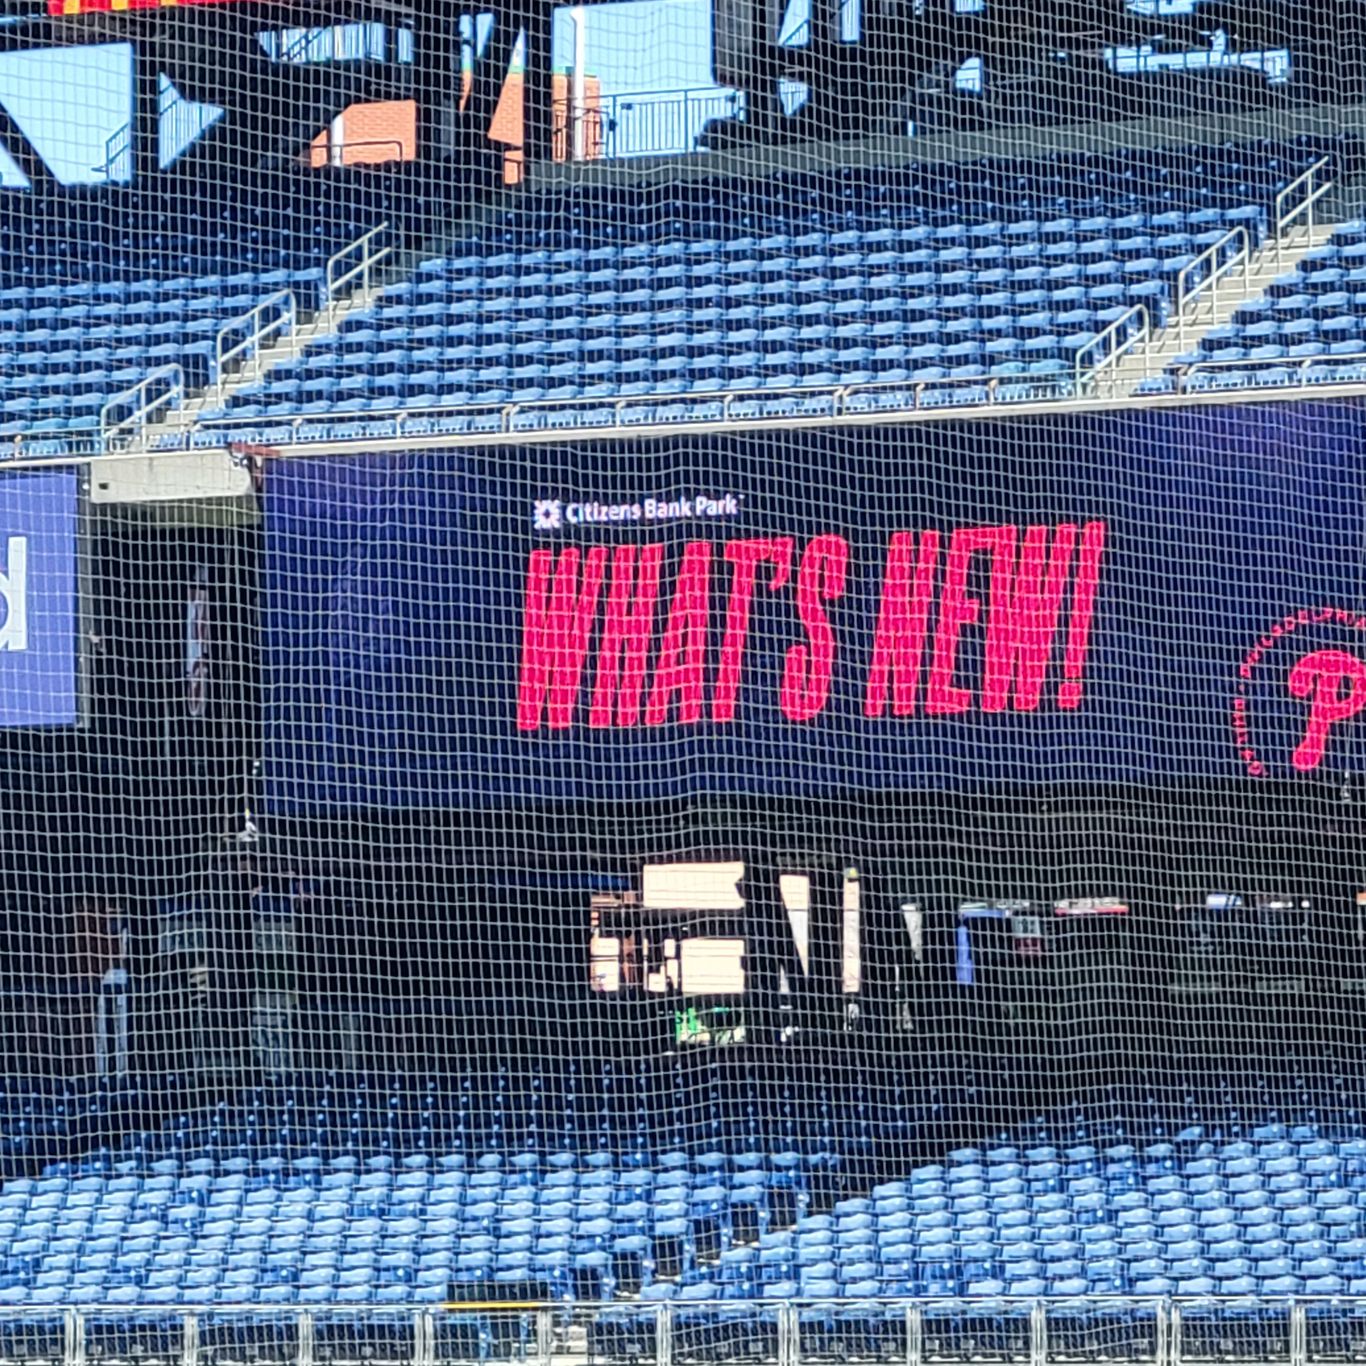 Phillies opening day: What to expect at Citizens Bank Park - Axios